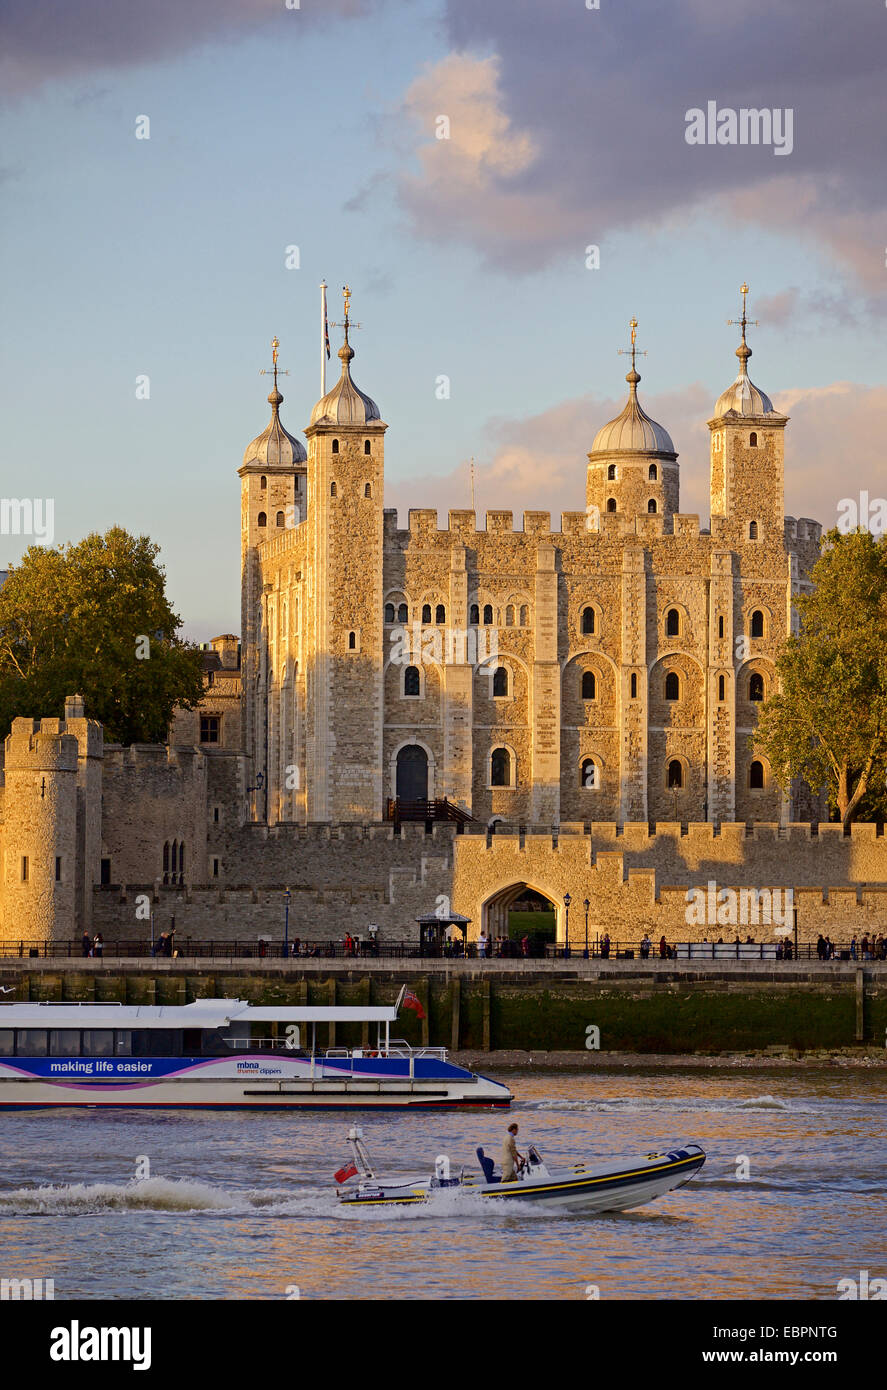 Tower of London, UNESCO World Heritage Site, and the River Thames in the evening, London, England, United Kingdom, Europe Stock Photo